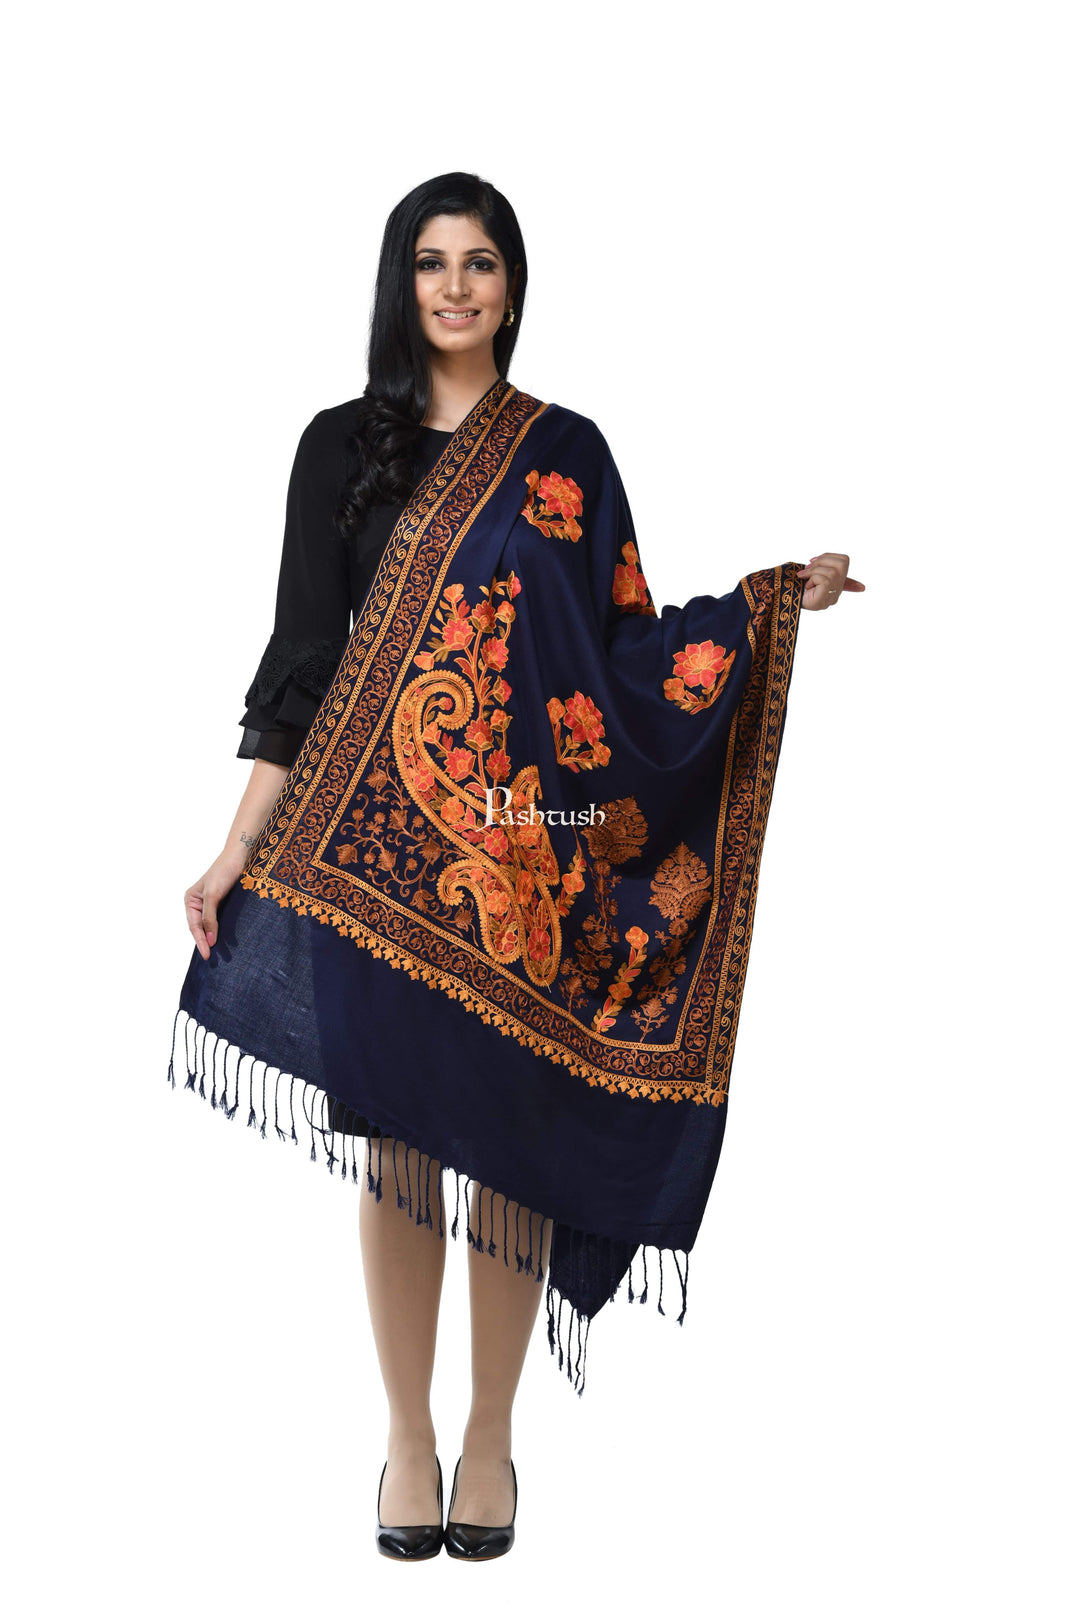 Pashwool Womens Stoles and Scarves Scarf Pashwool, Womens Kashmiri Aari Embroidery Stole, Soft Bamboo, Navy Blue